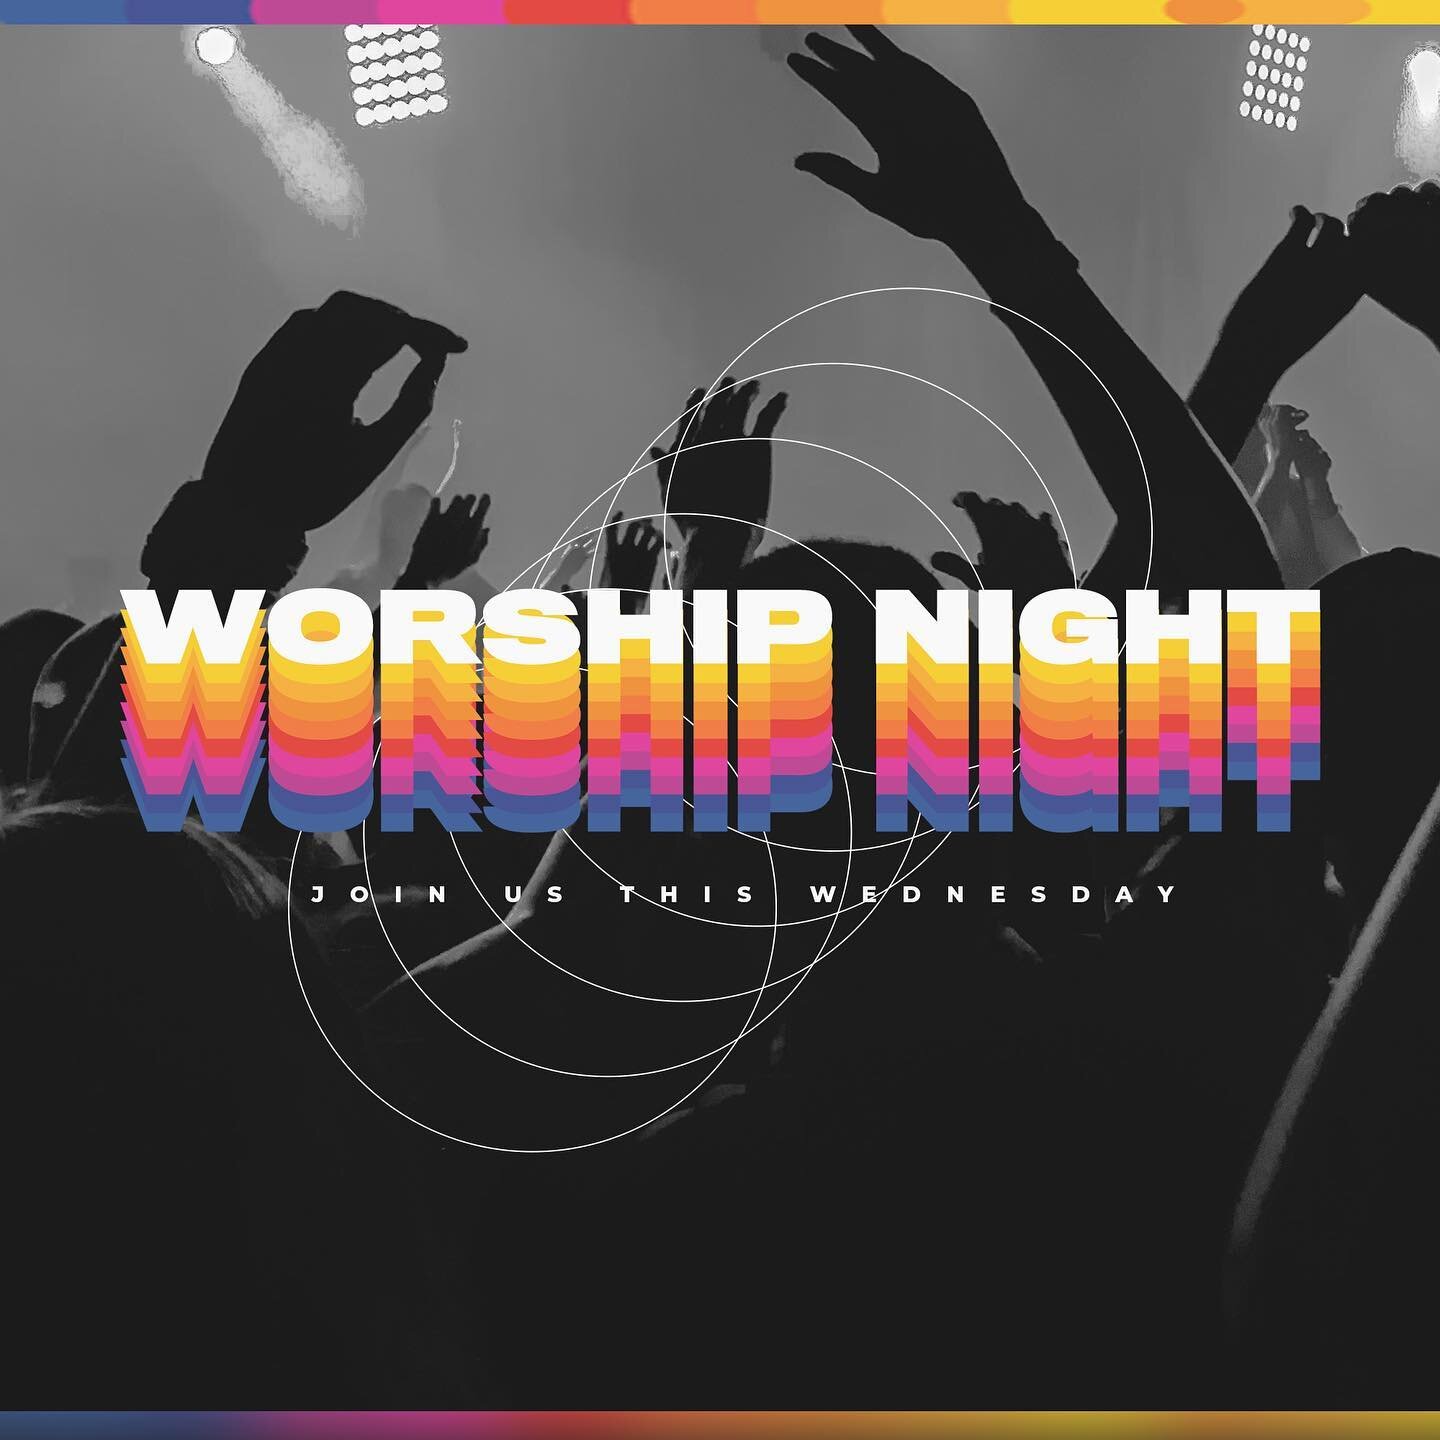 Ready to encounter Jesus together? 🙏

God has been doing some really special things, and we are ready to lean into His presence and give Him everything.

See you tonight at 7pm for WORSHIP NIGHT! Scroll to see our setlist!

Listen here: https://open